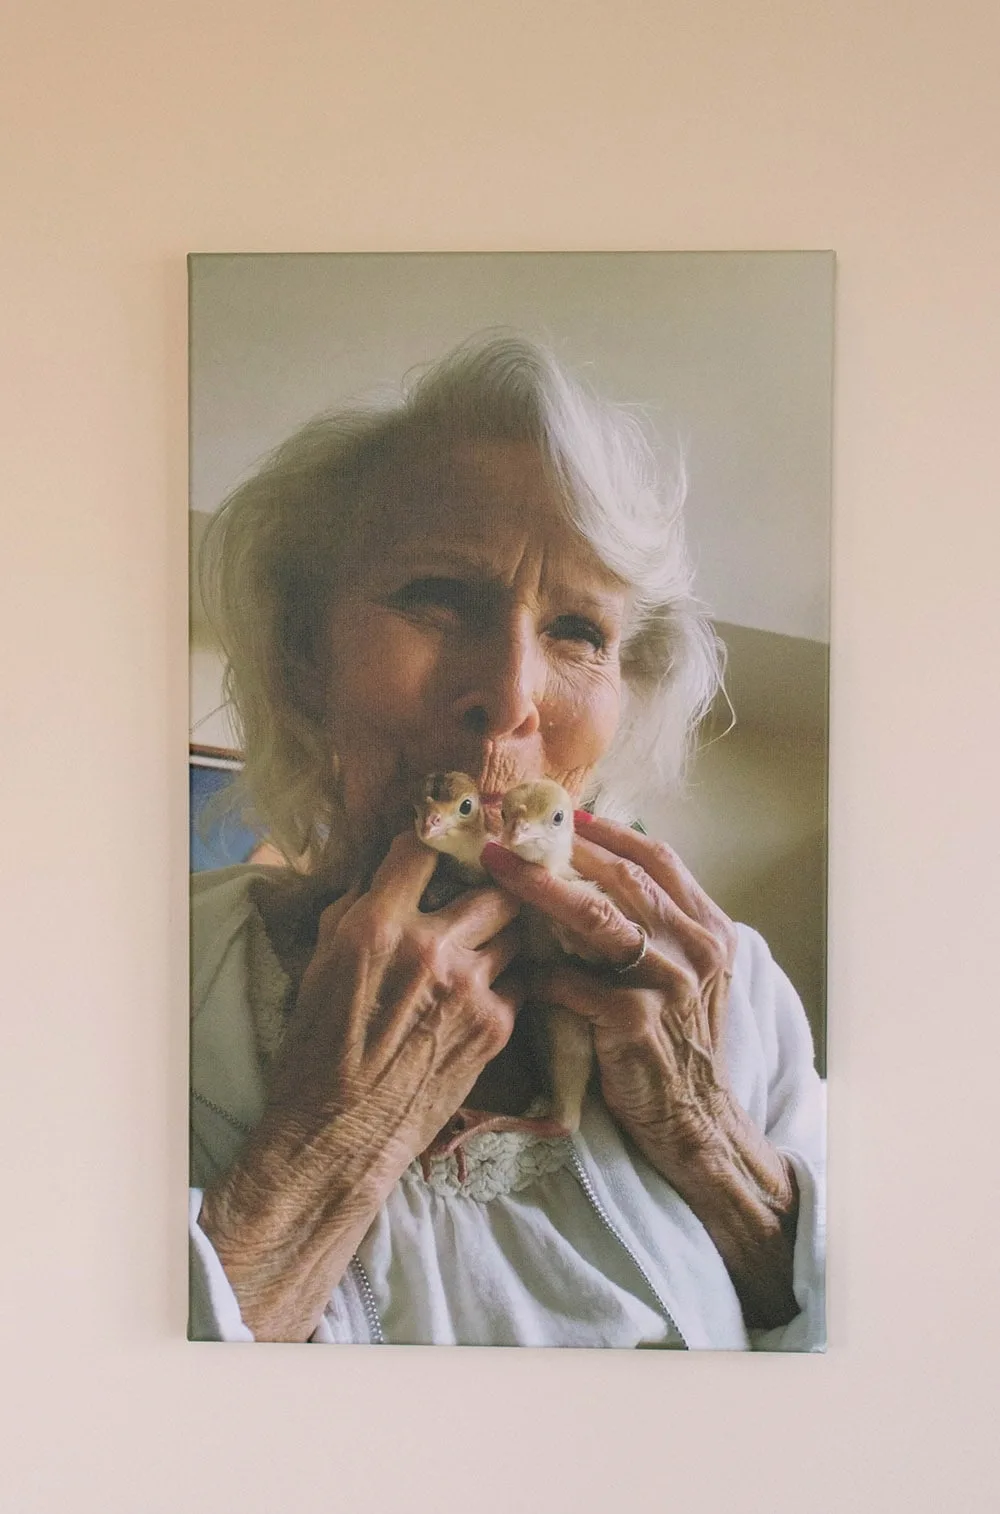 Gram and her baby turkeys on a canvas print.